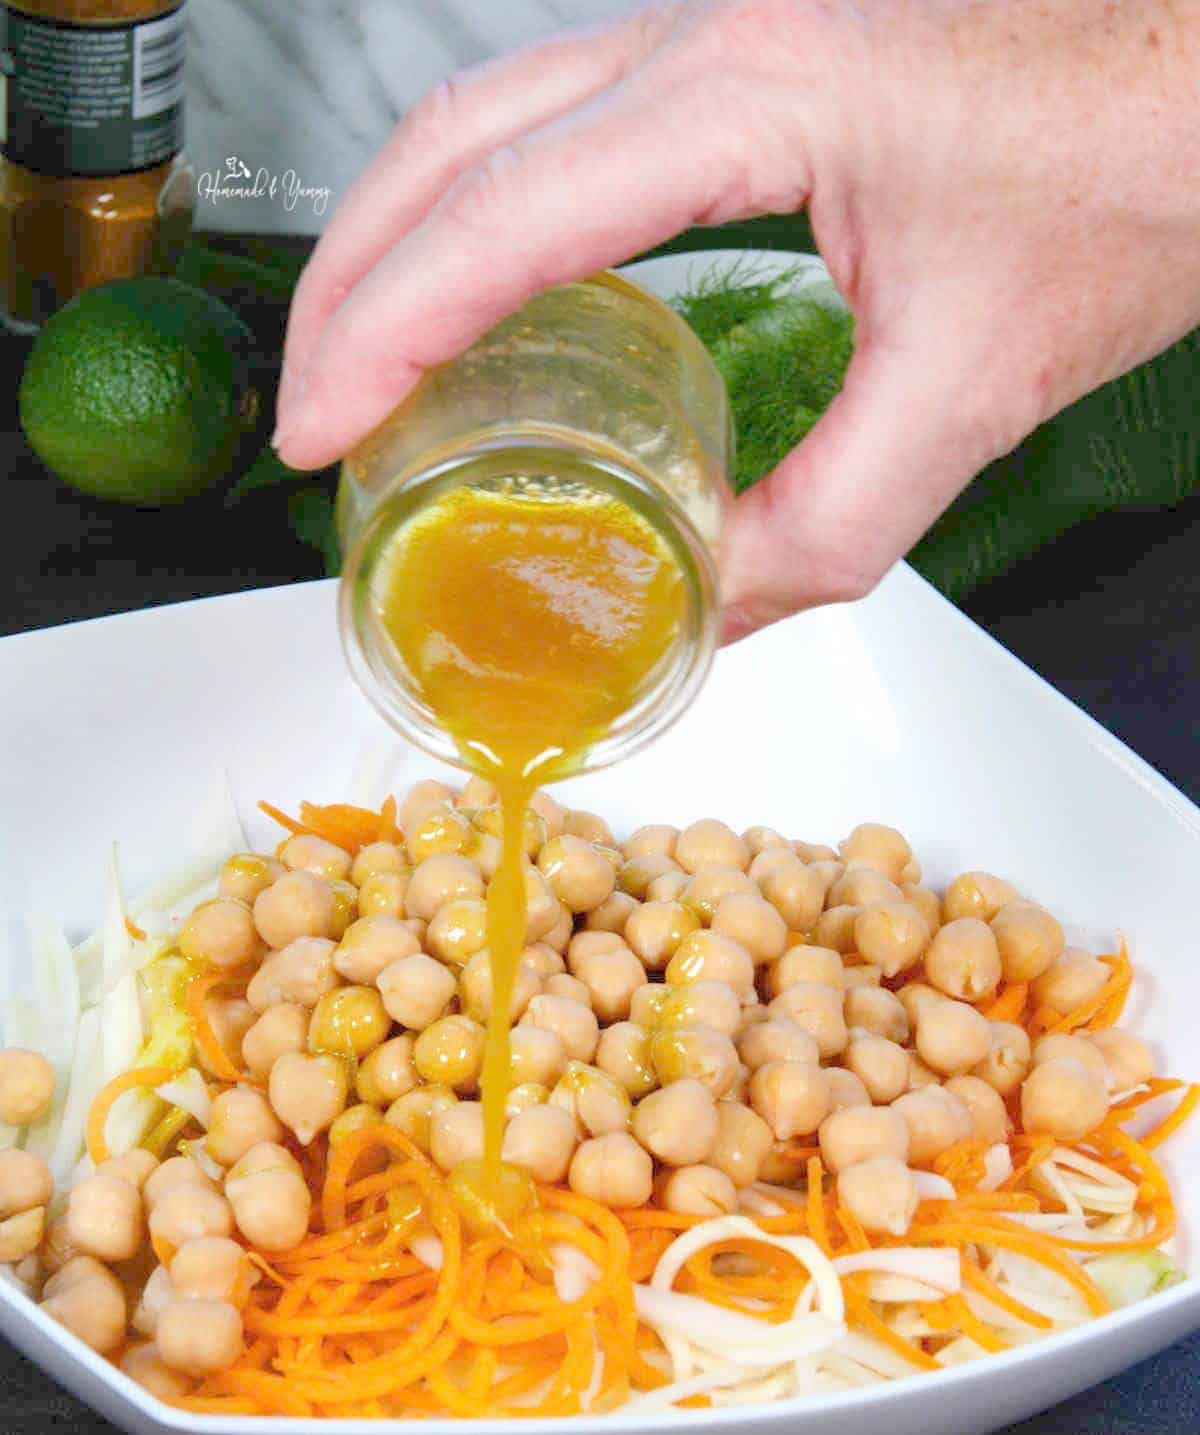 Pouring salad dressing over the salad ingredients.